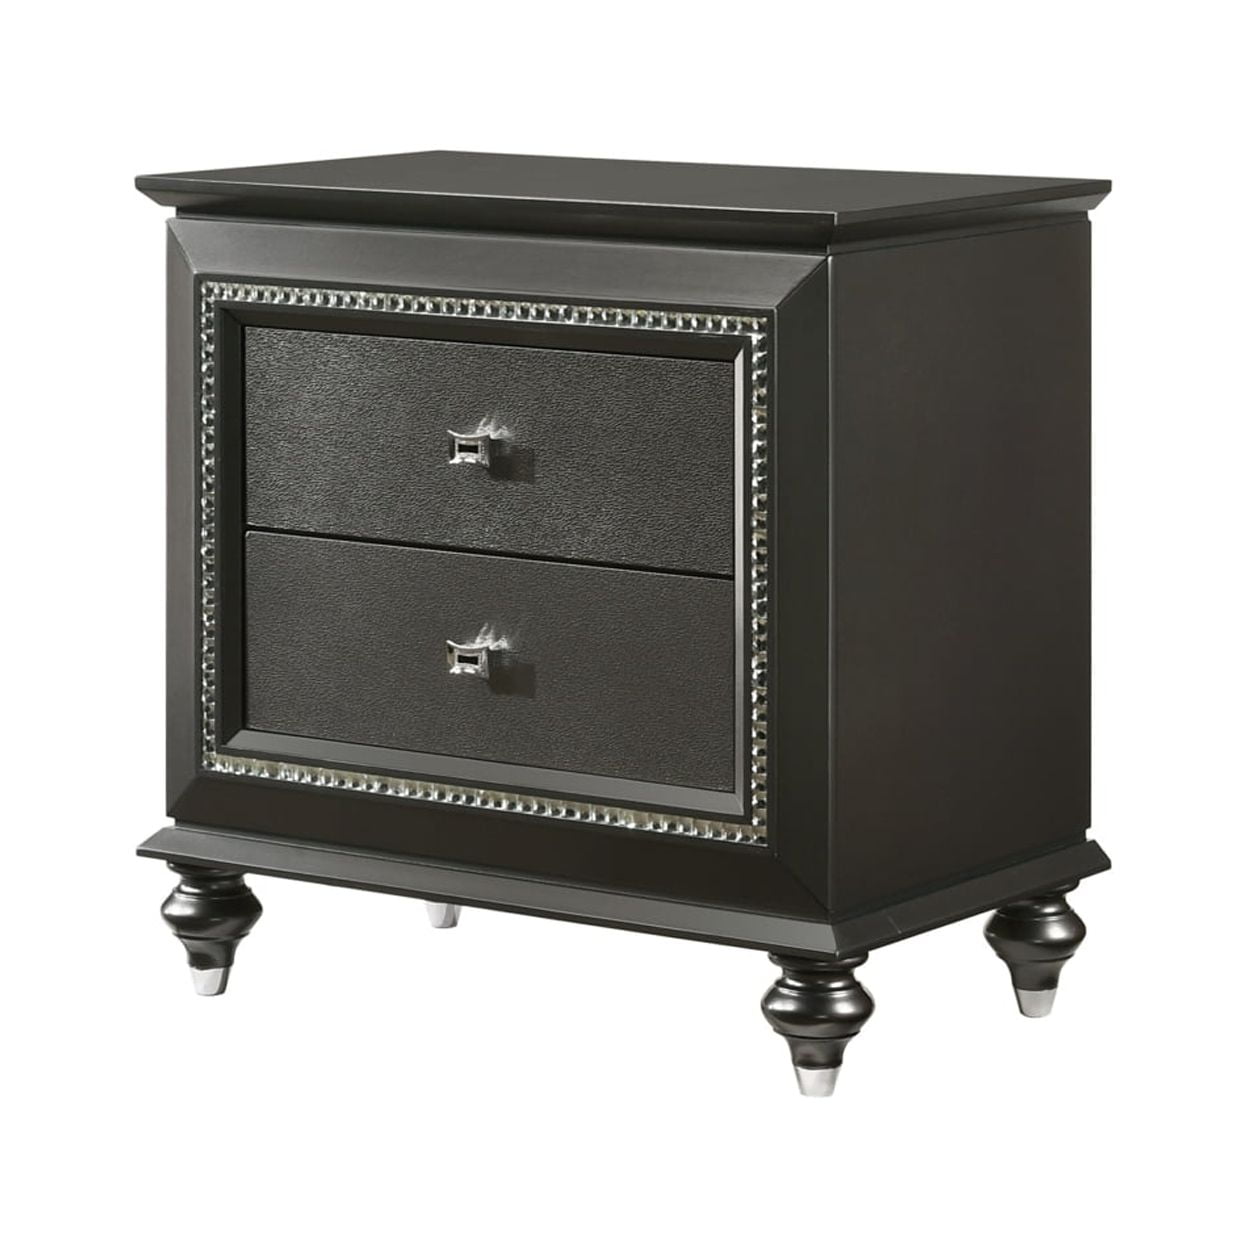 Picture of Acme Furniture 27283 30 x 18 x 30 in. Kaitlyn Nightstand, Metallic Gray